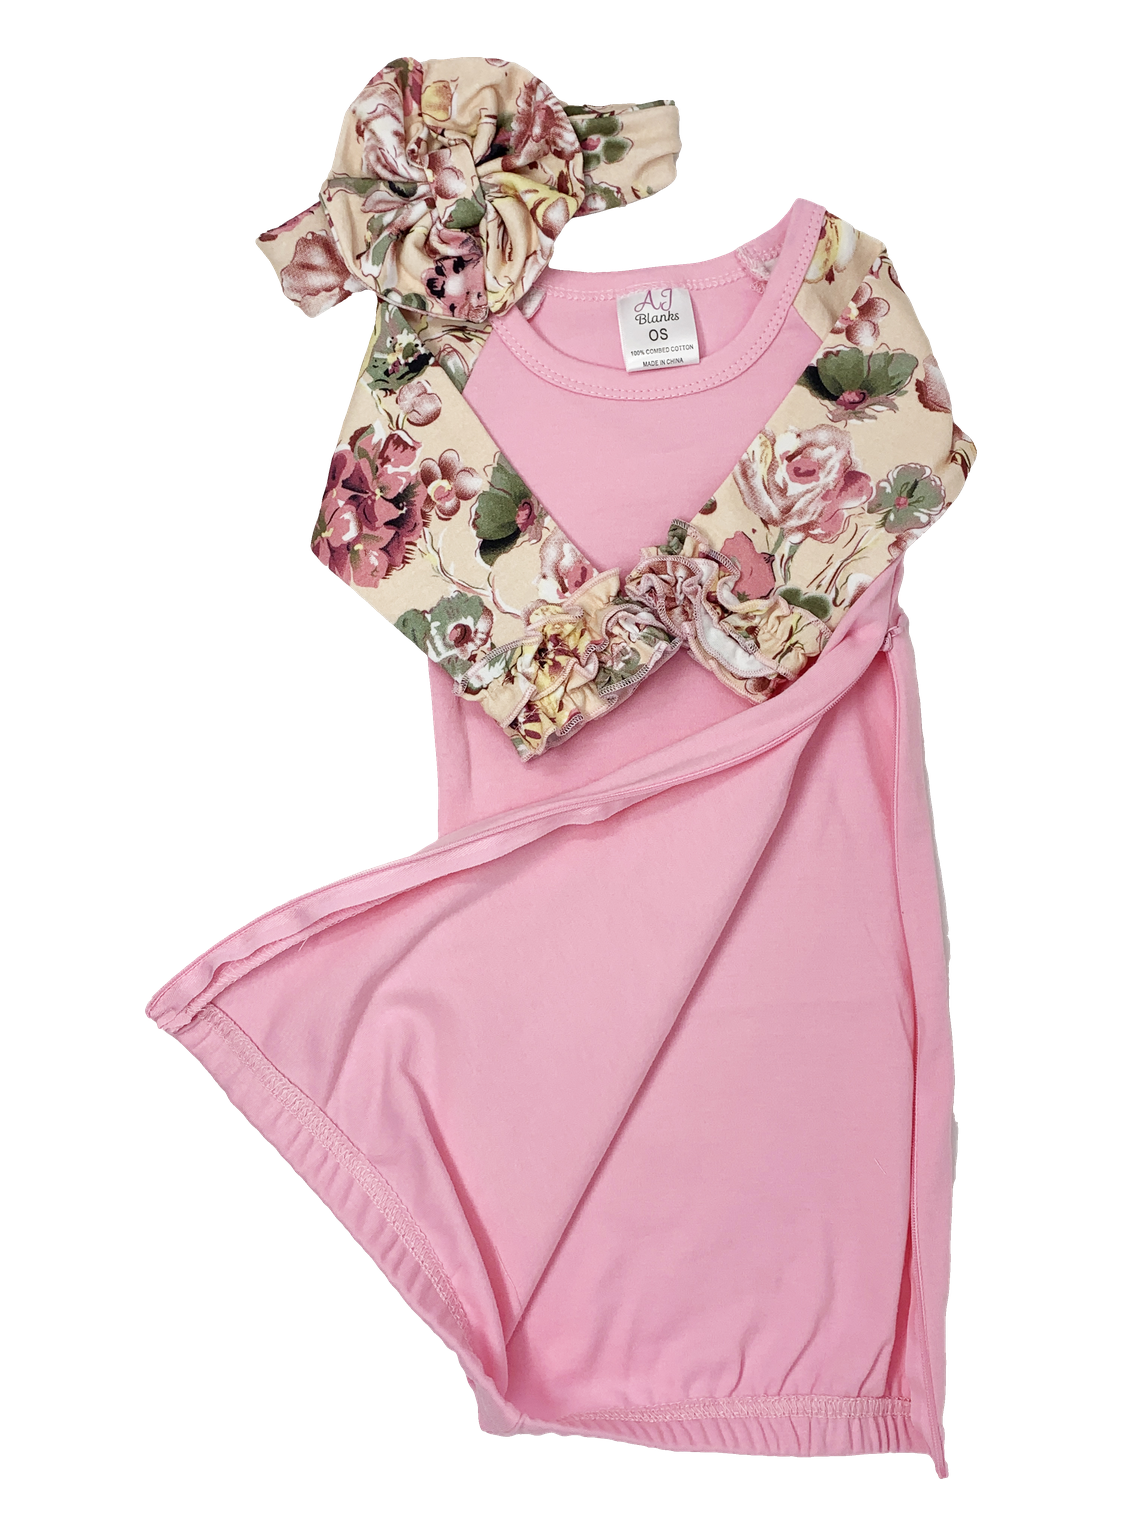 Pink Floral Baby Gown Headband Set with Hidden Zipper (Swatch Included)